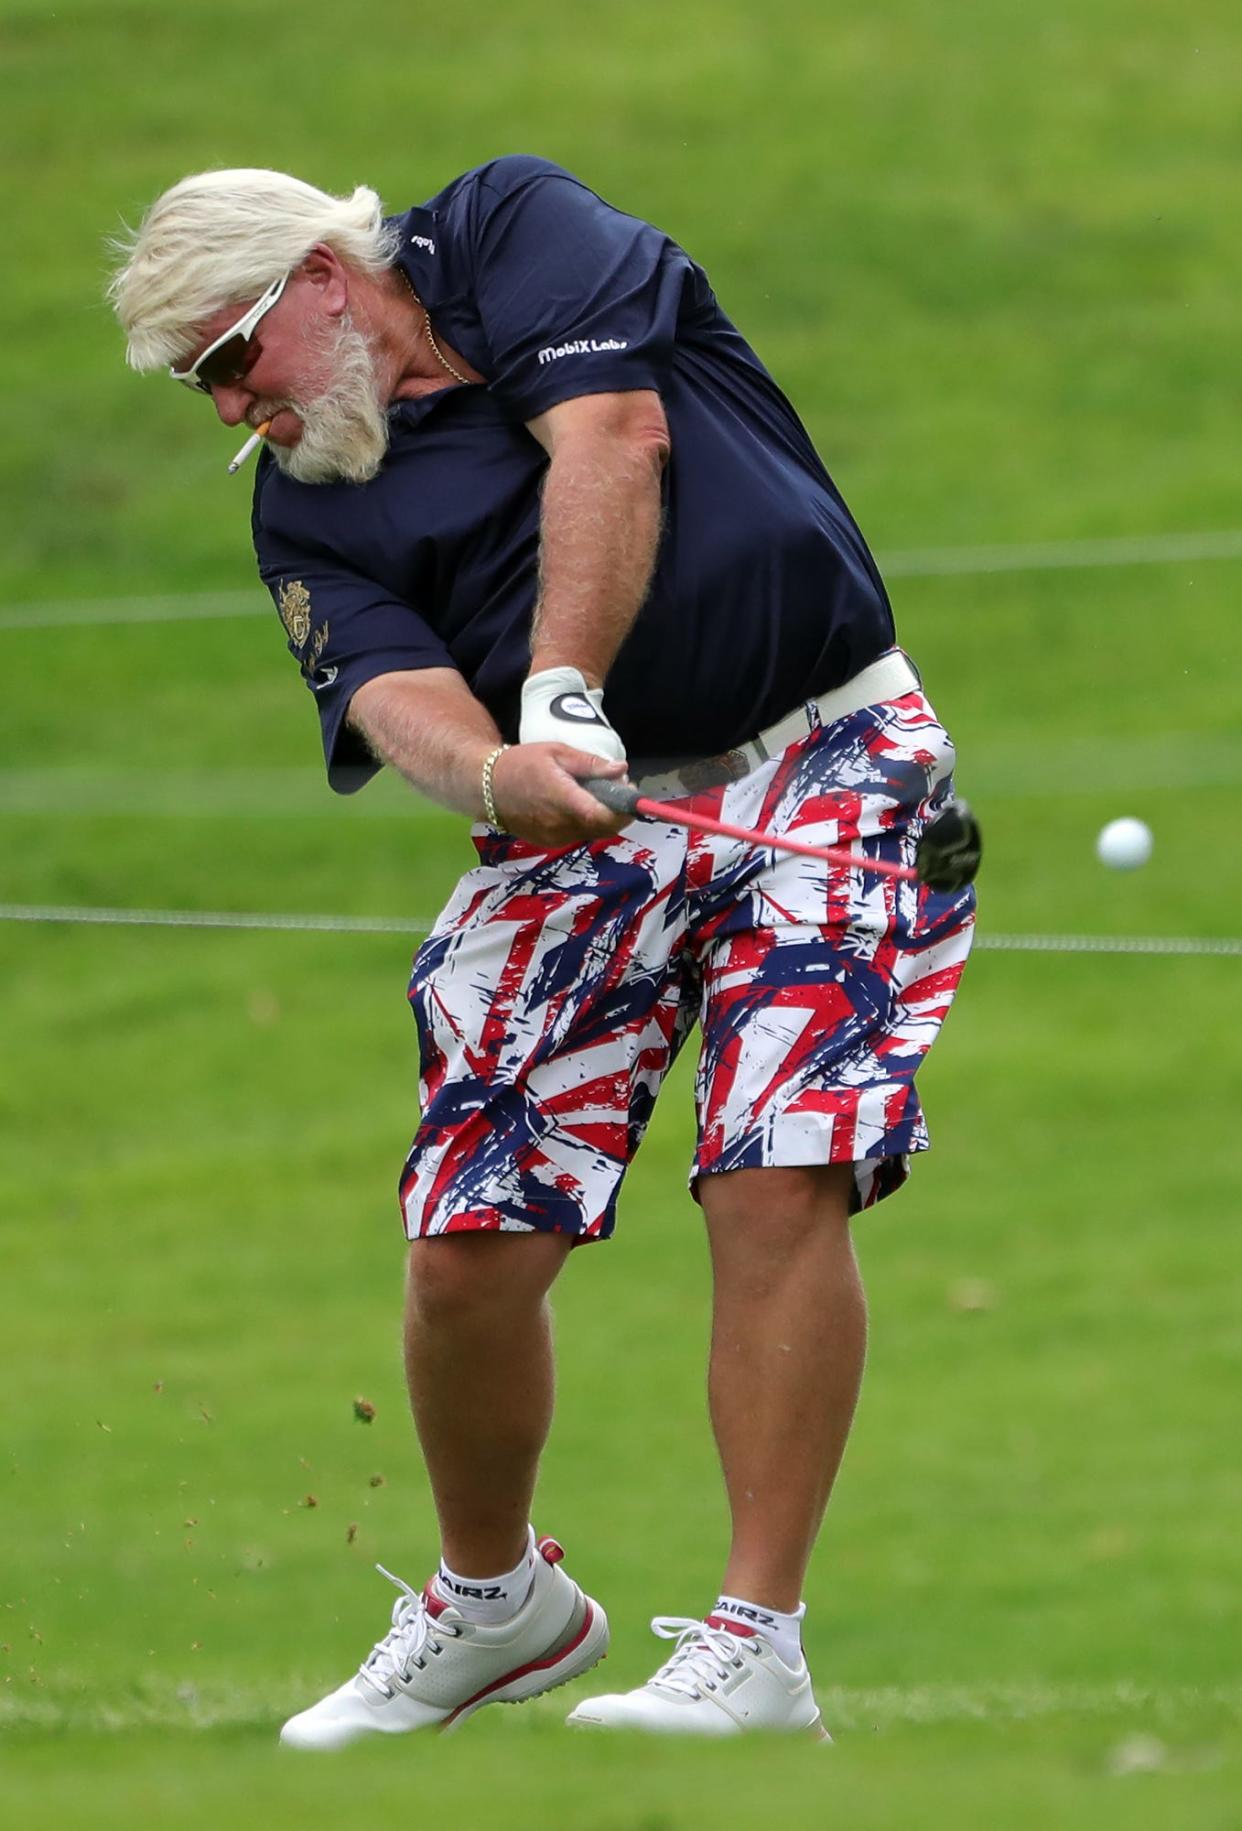 John Daly sends his ball down the No. 7 fairway during the Bridgestone Senior Players Pro-Am at Firestone Country Club on Wednesday, June 23, 2021, in Akron, Ohio.